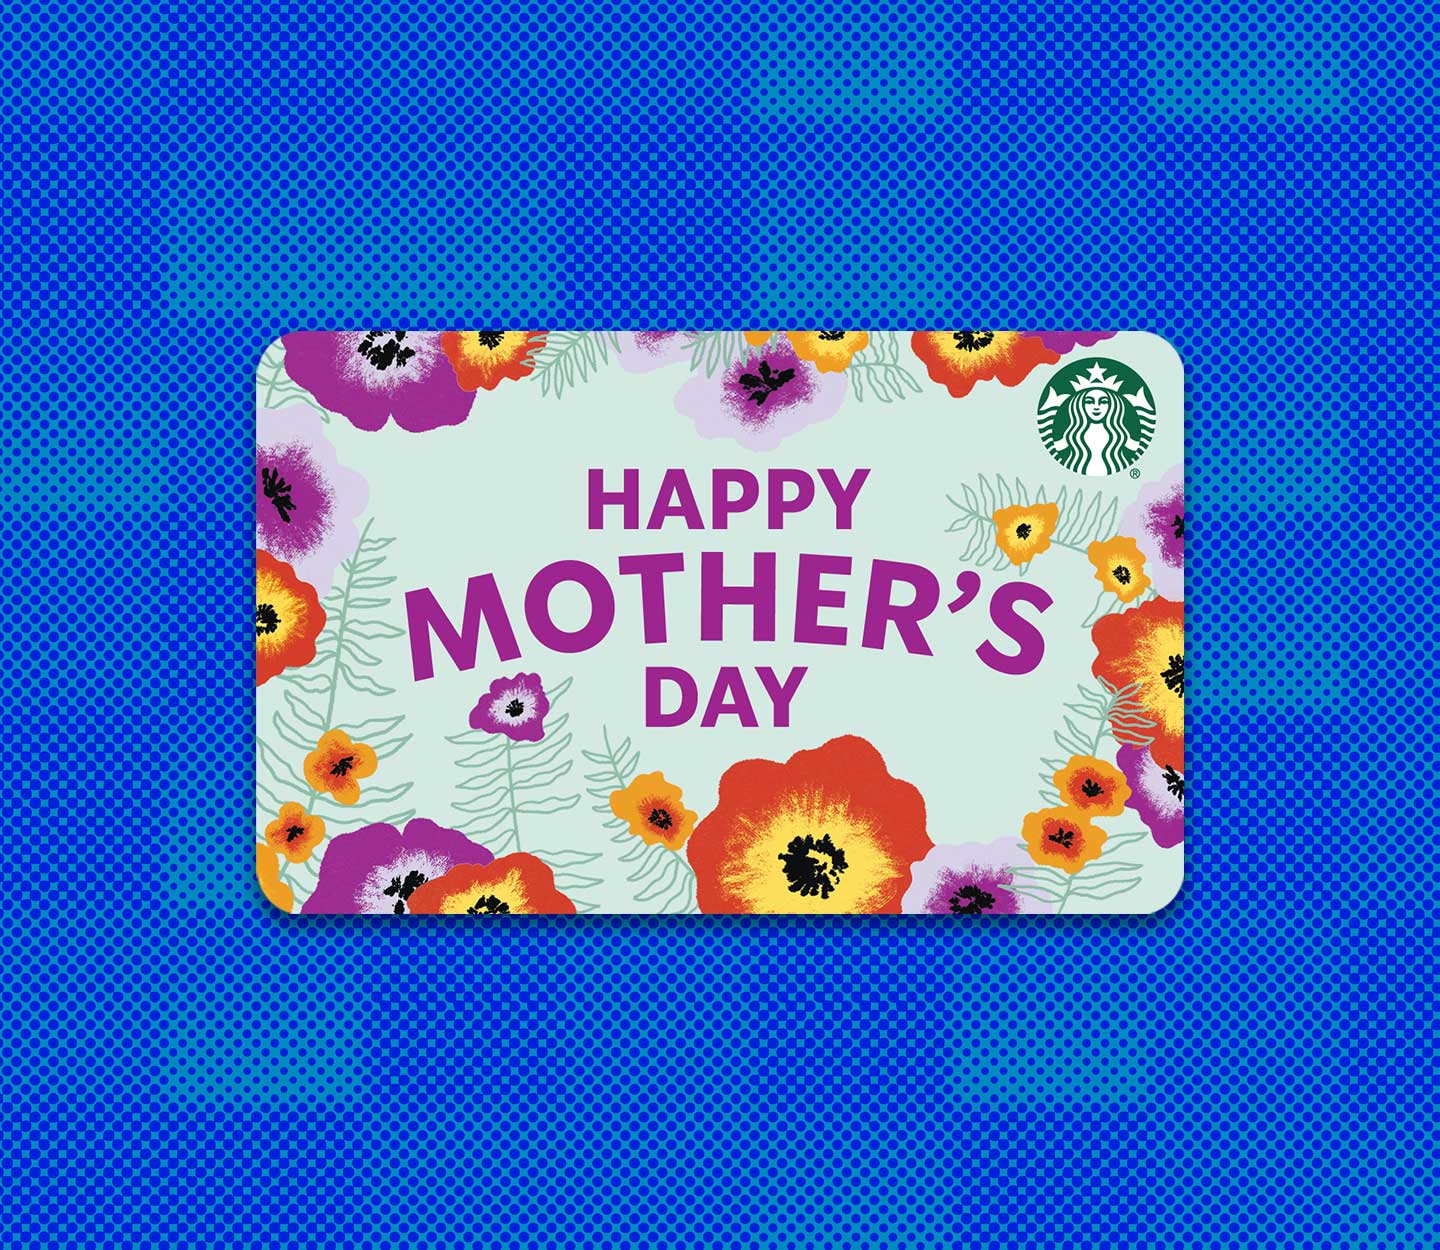 A Starbucks gift card illustrated with flowers around the perimeter that says, “Bonne Fête Des Mères.”